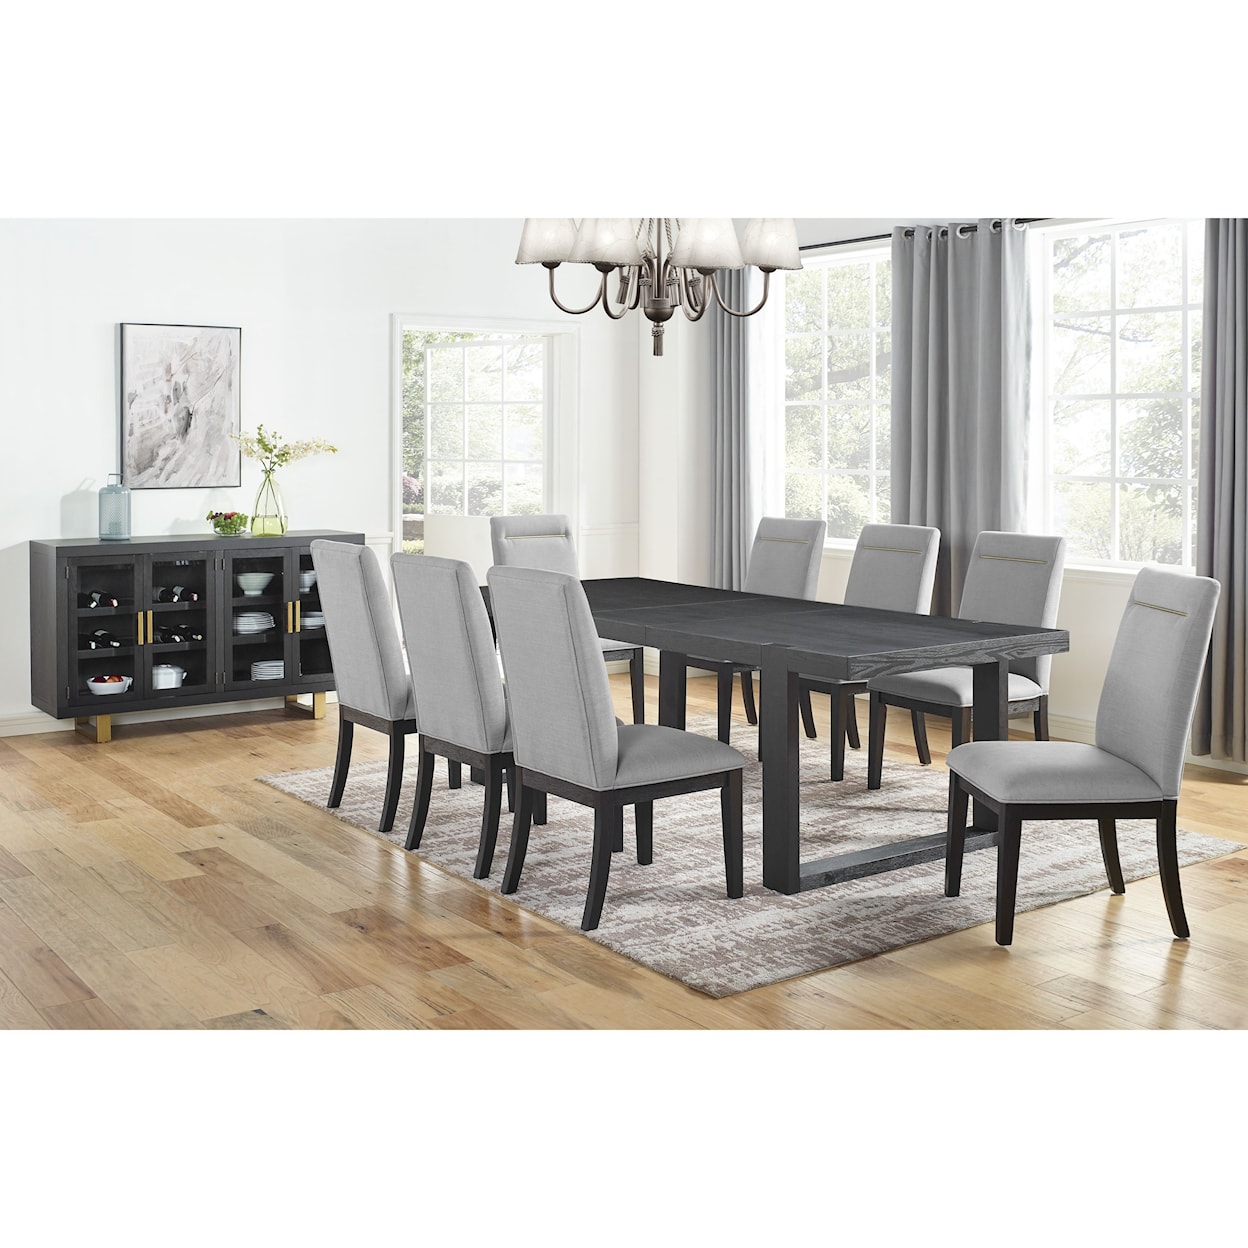 Prime Yves Dining Room Group